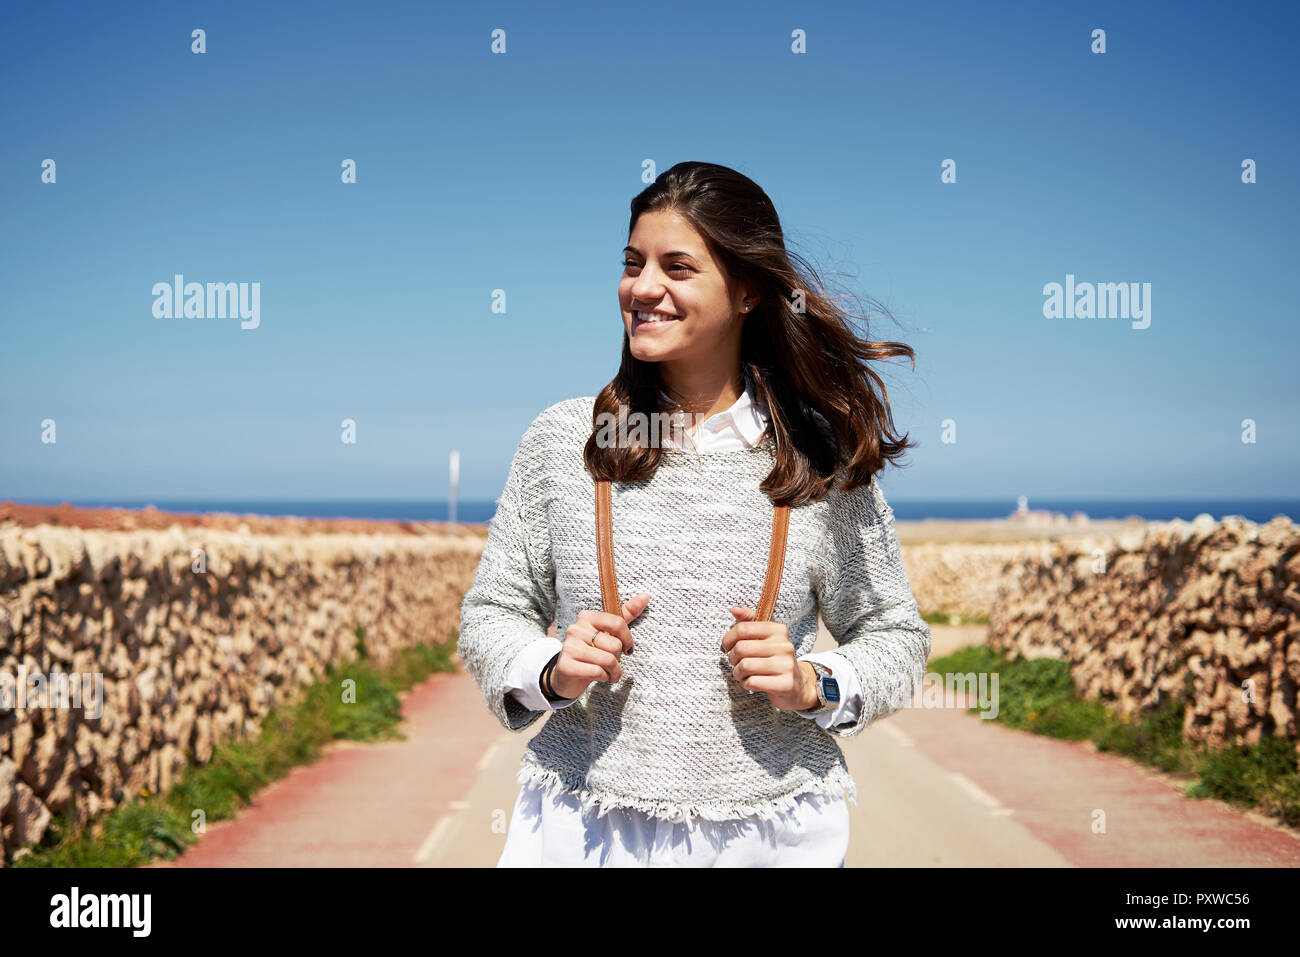 Young smiling brunette woman outdoors Banque D'Images